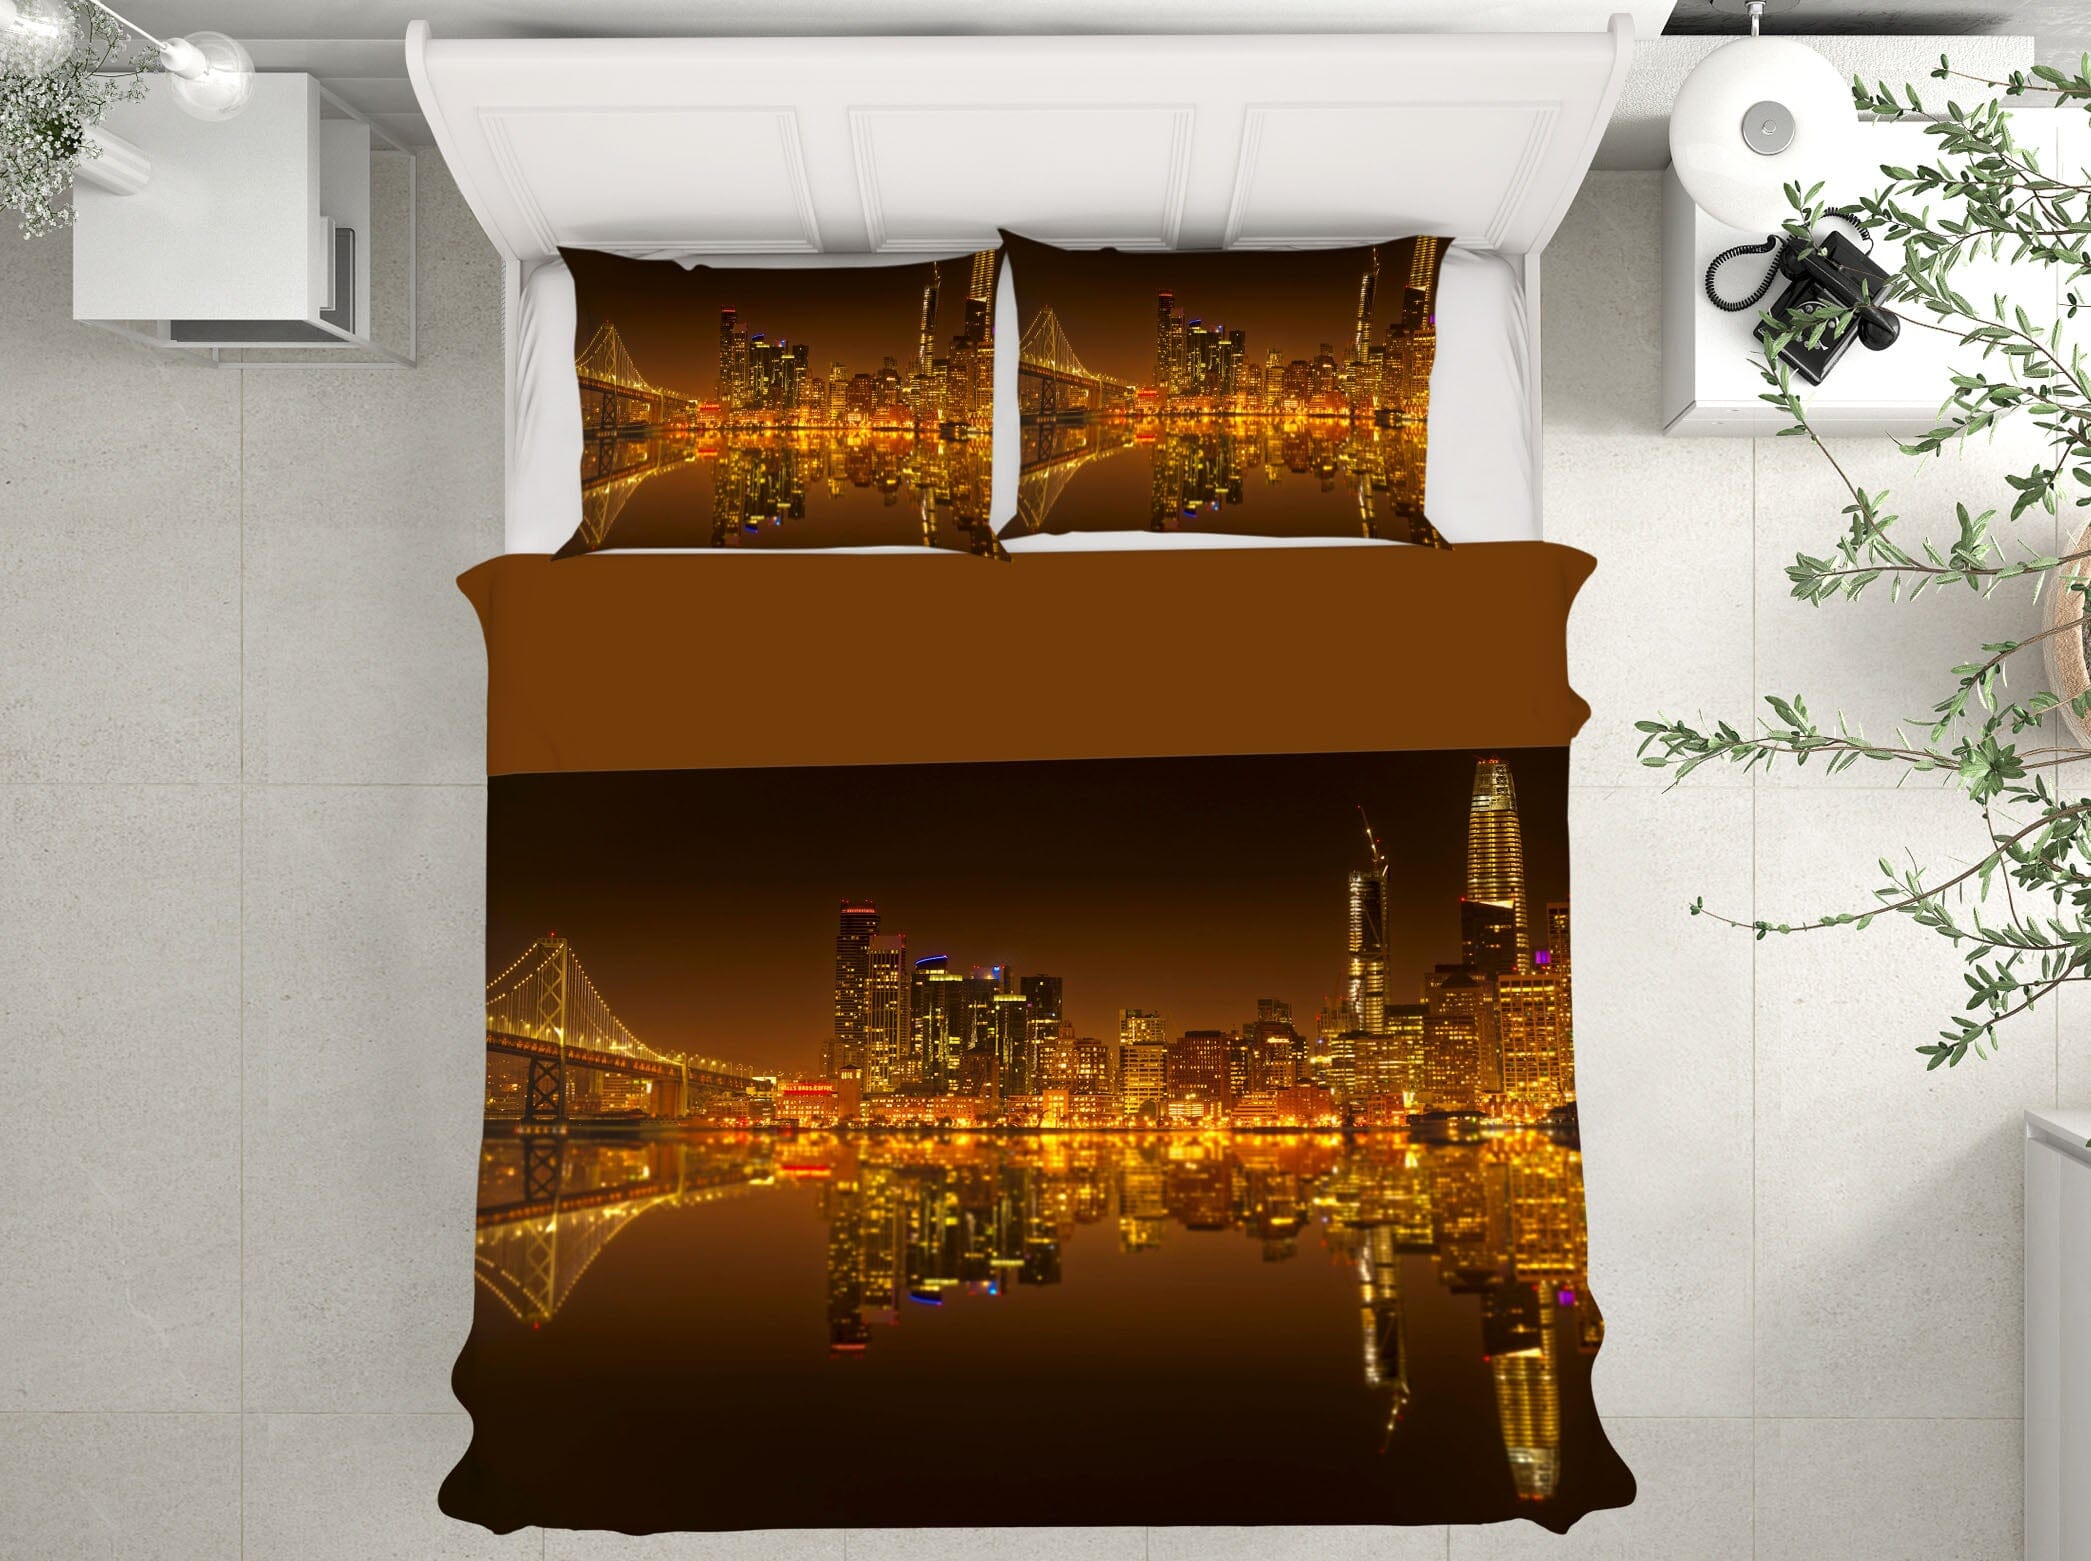 3D Canal Lights 2110 Marco Carmassi Bedding Bed Pillowcases Quilt Quiet Covers AJ Creativity Home 